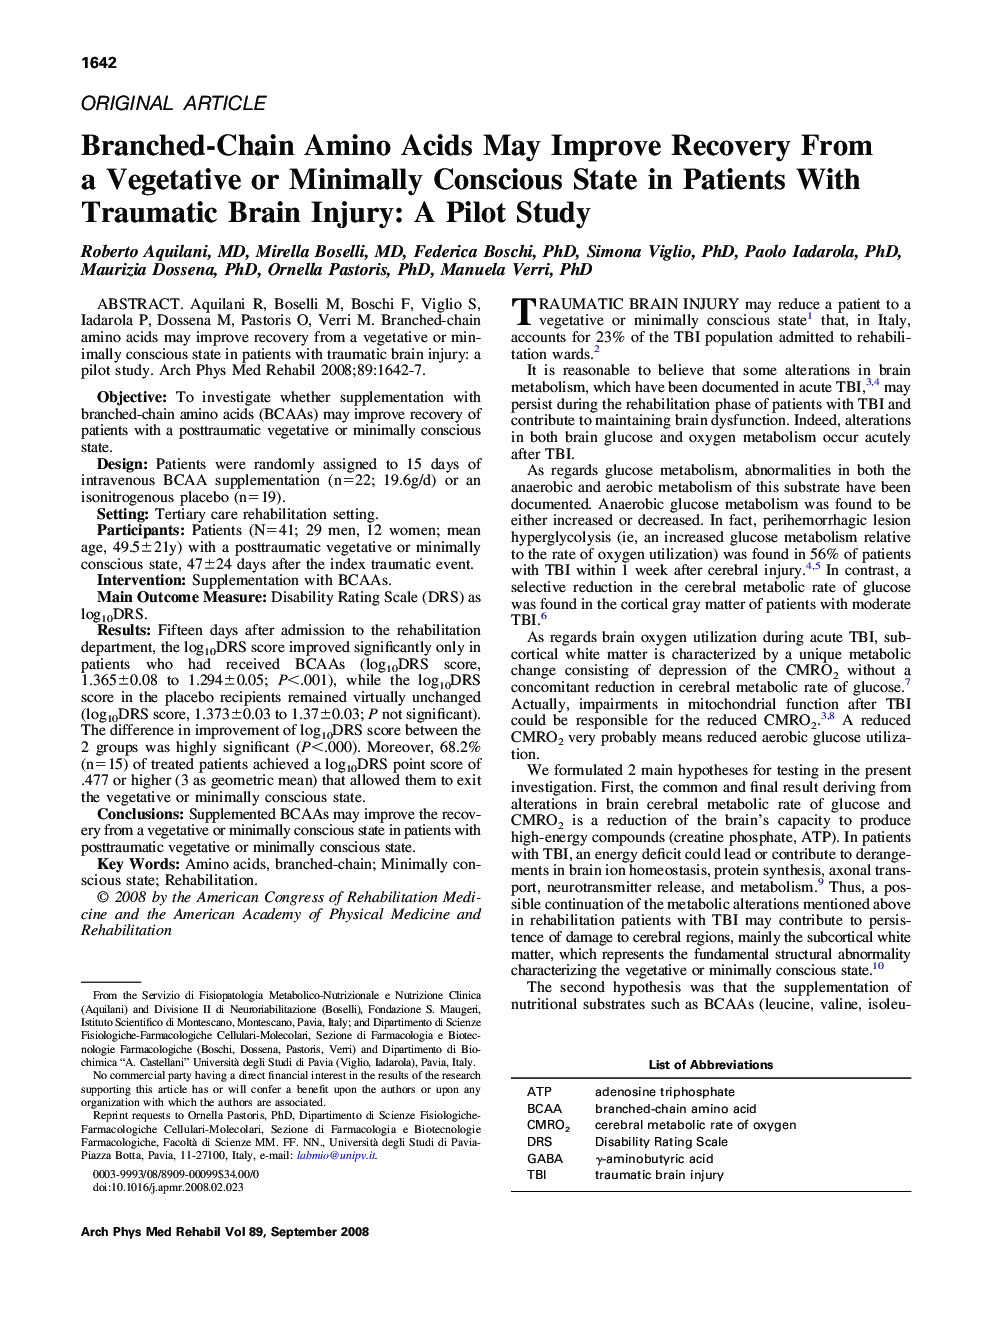 Branched-Chain Amino Acids May Improve Recovery From a Vegetative or Minimally Conscious State in Patients With Traumatic Brain Injury: A Pilot Study